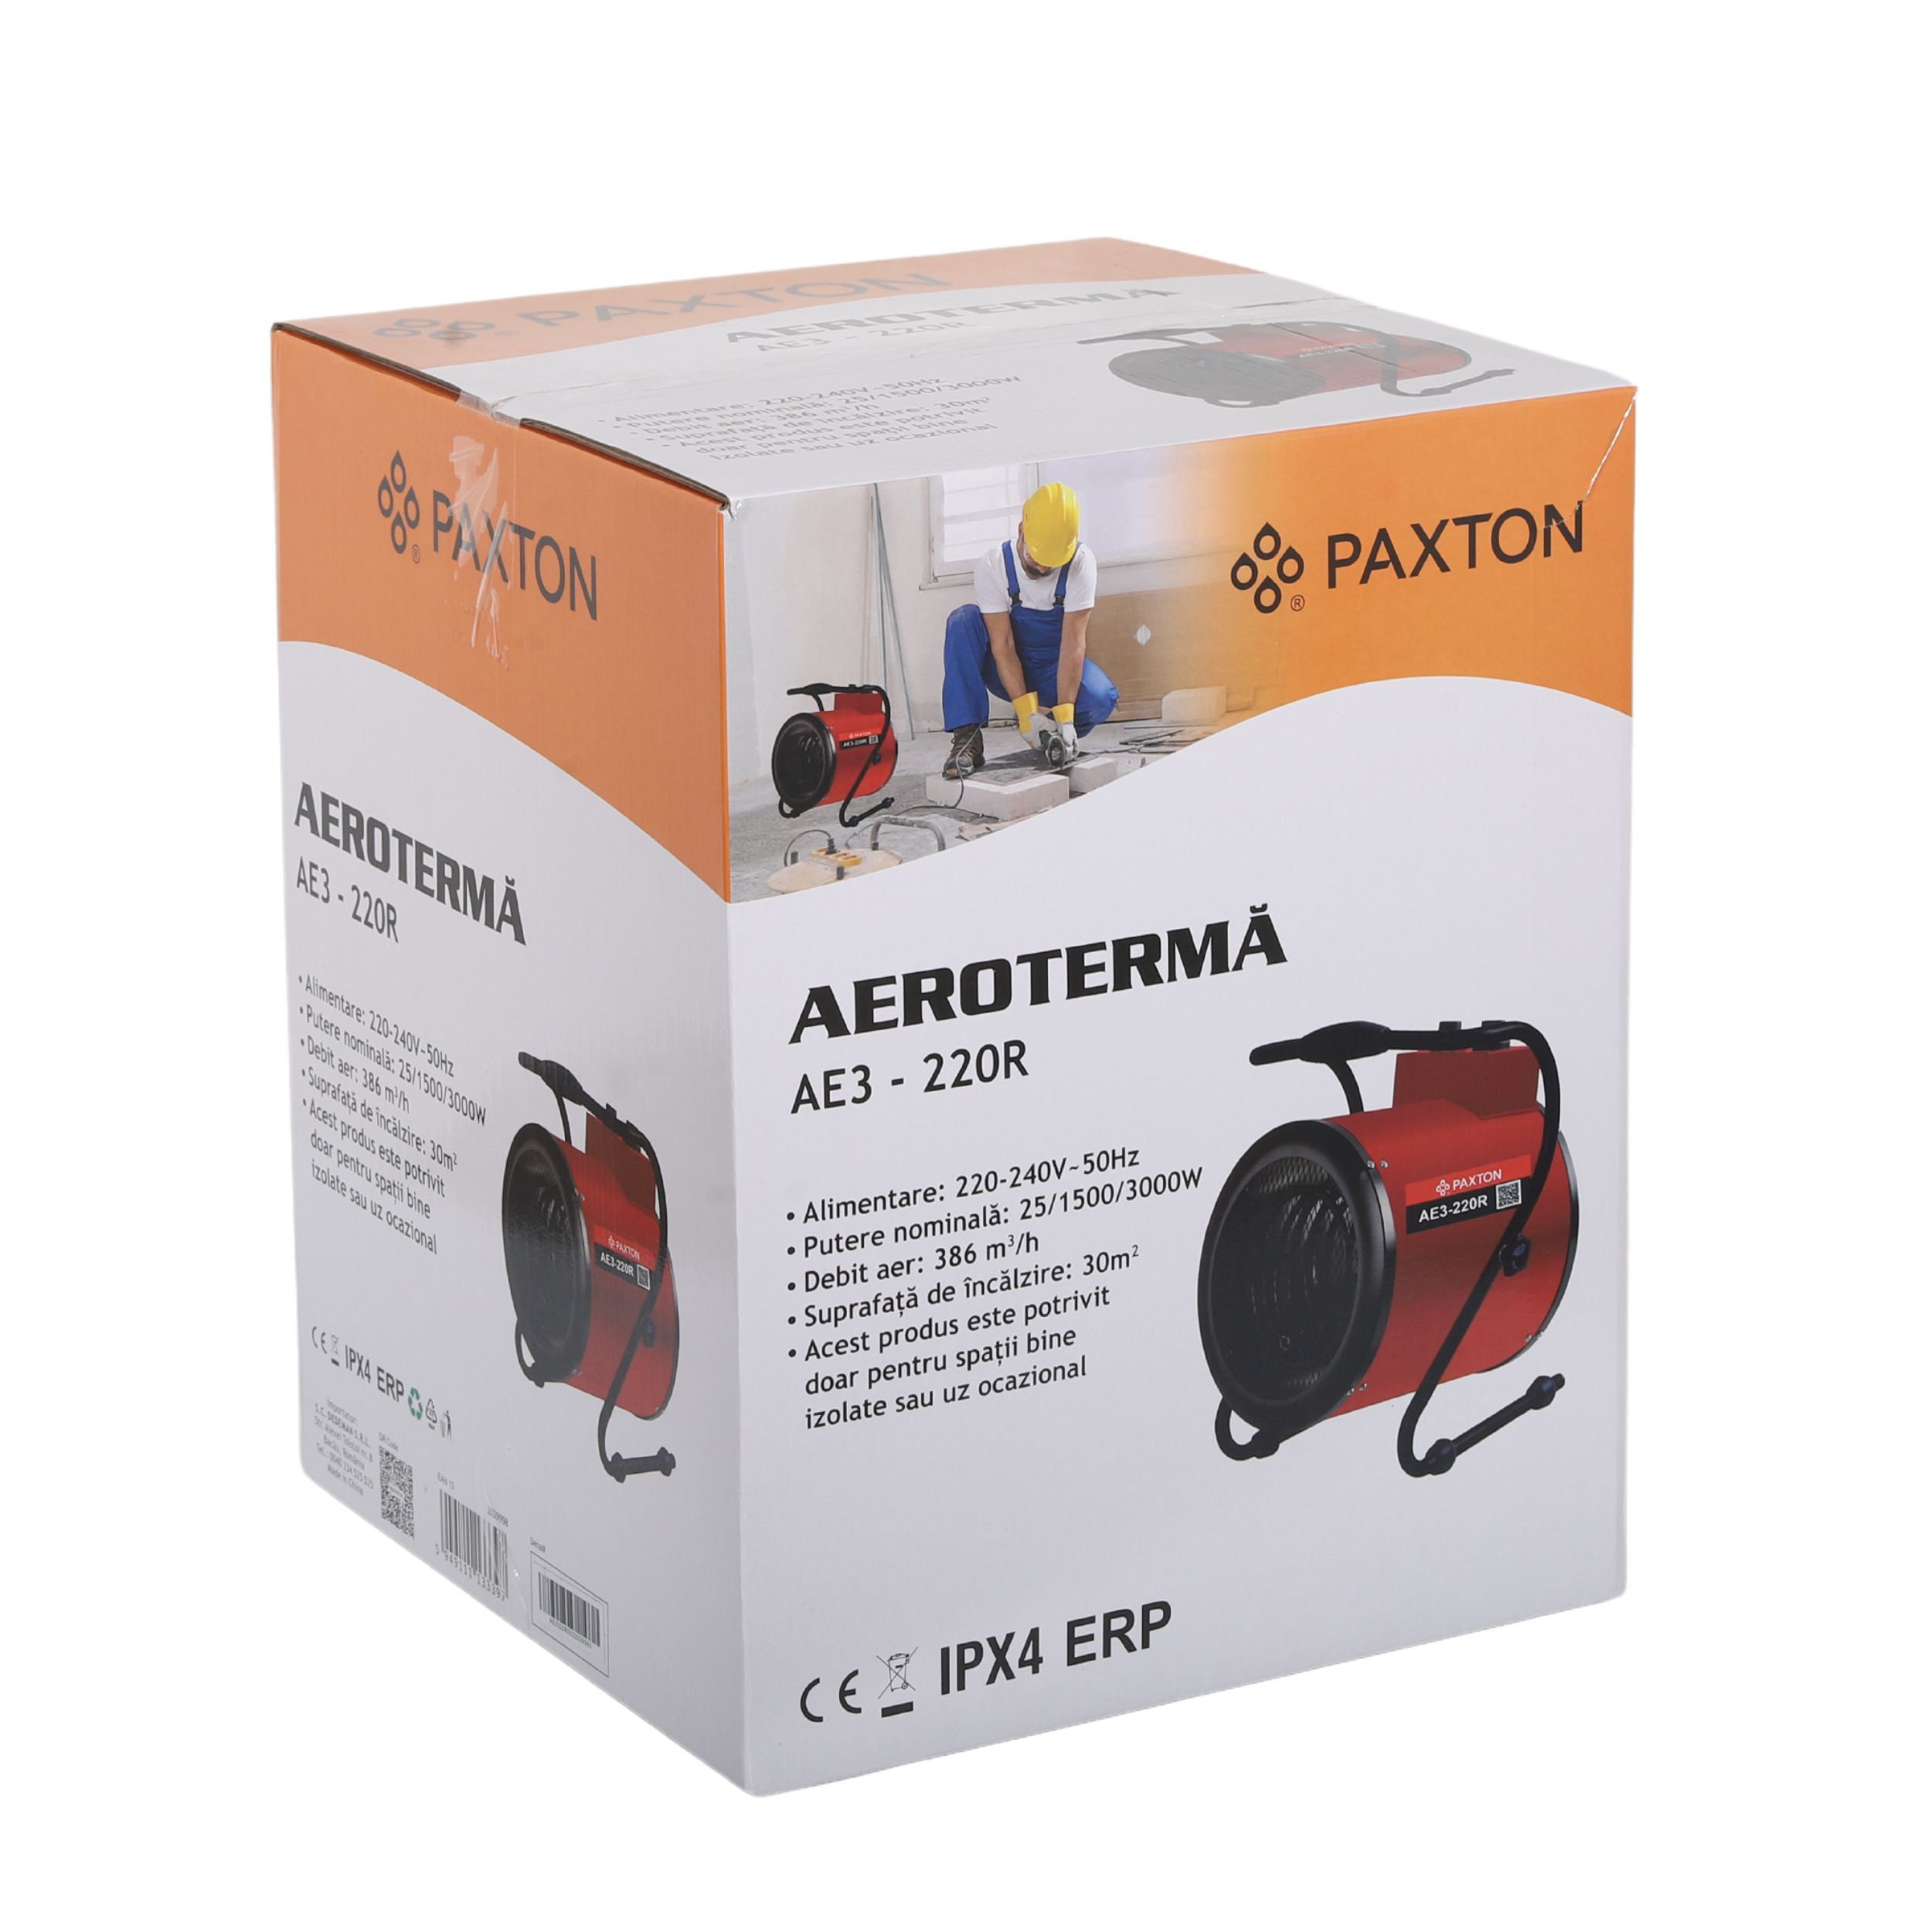 Aeroterma aer cald, electrica, Paxton AE3-220R-C, 3 kW, 220 - 240 V